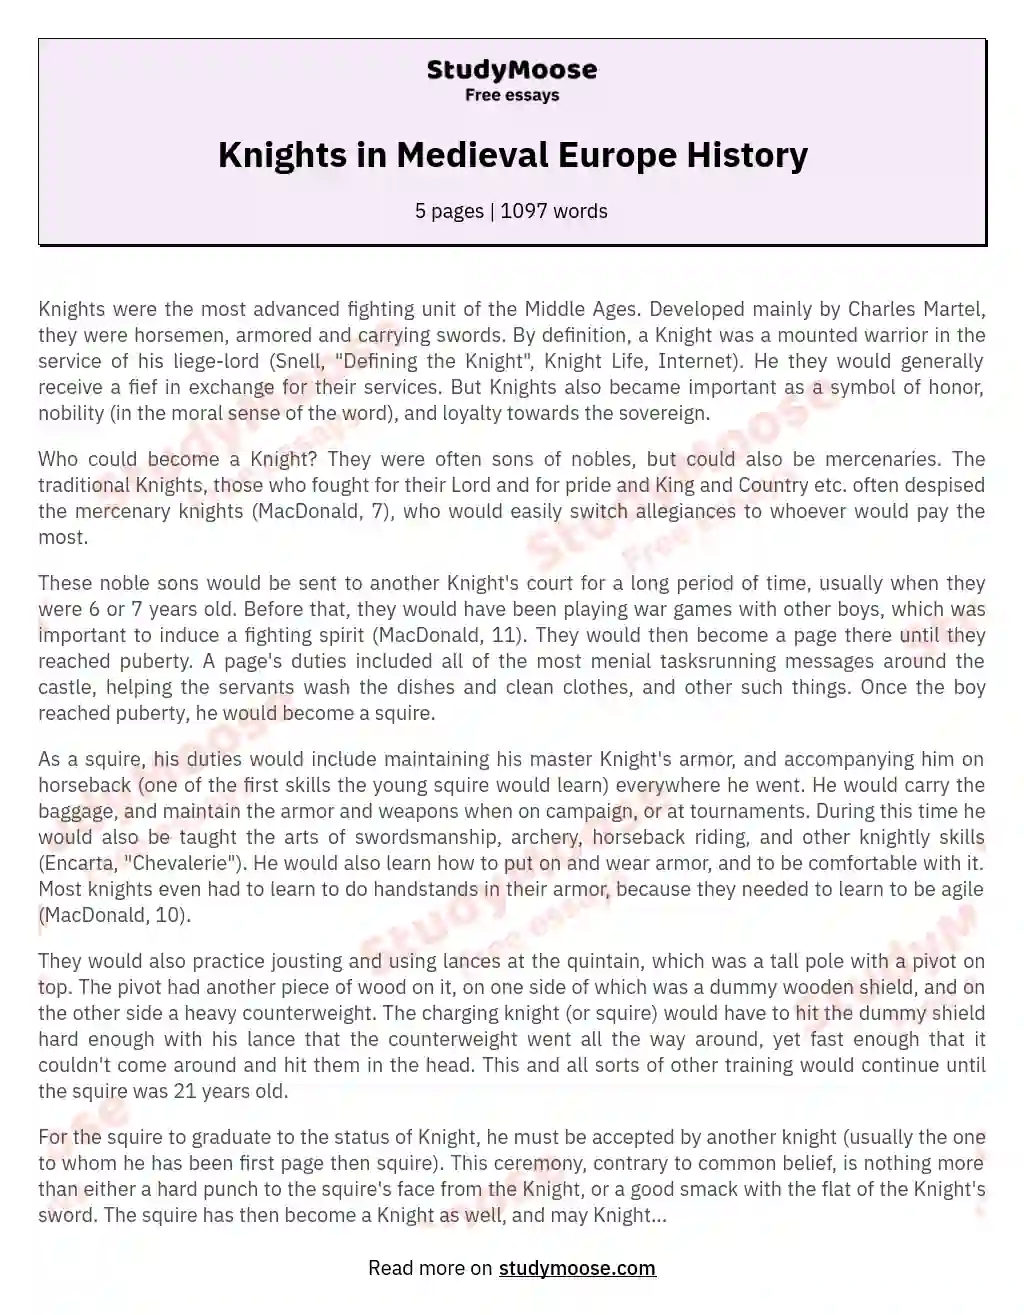 Knights in Medieval Europe History